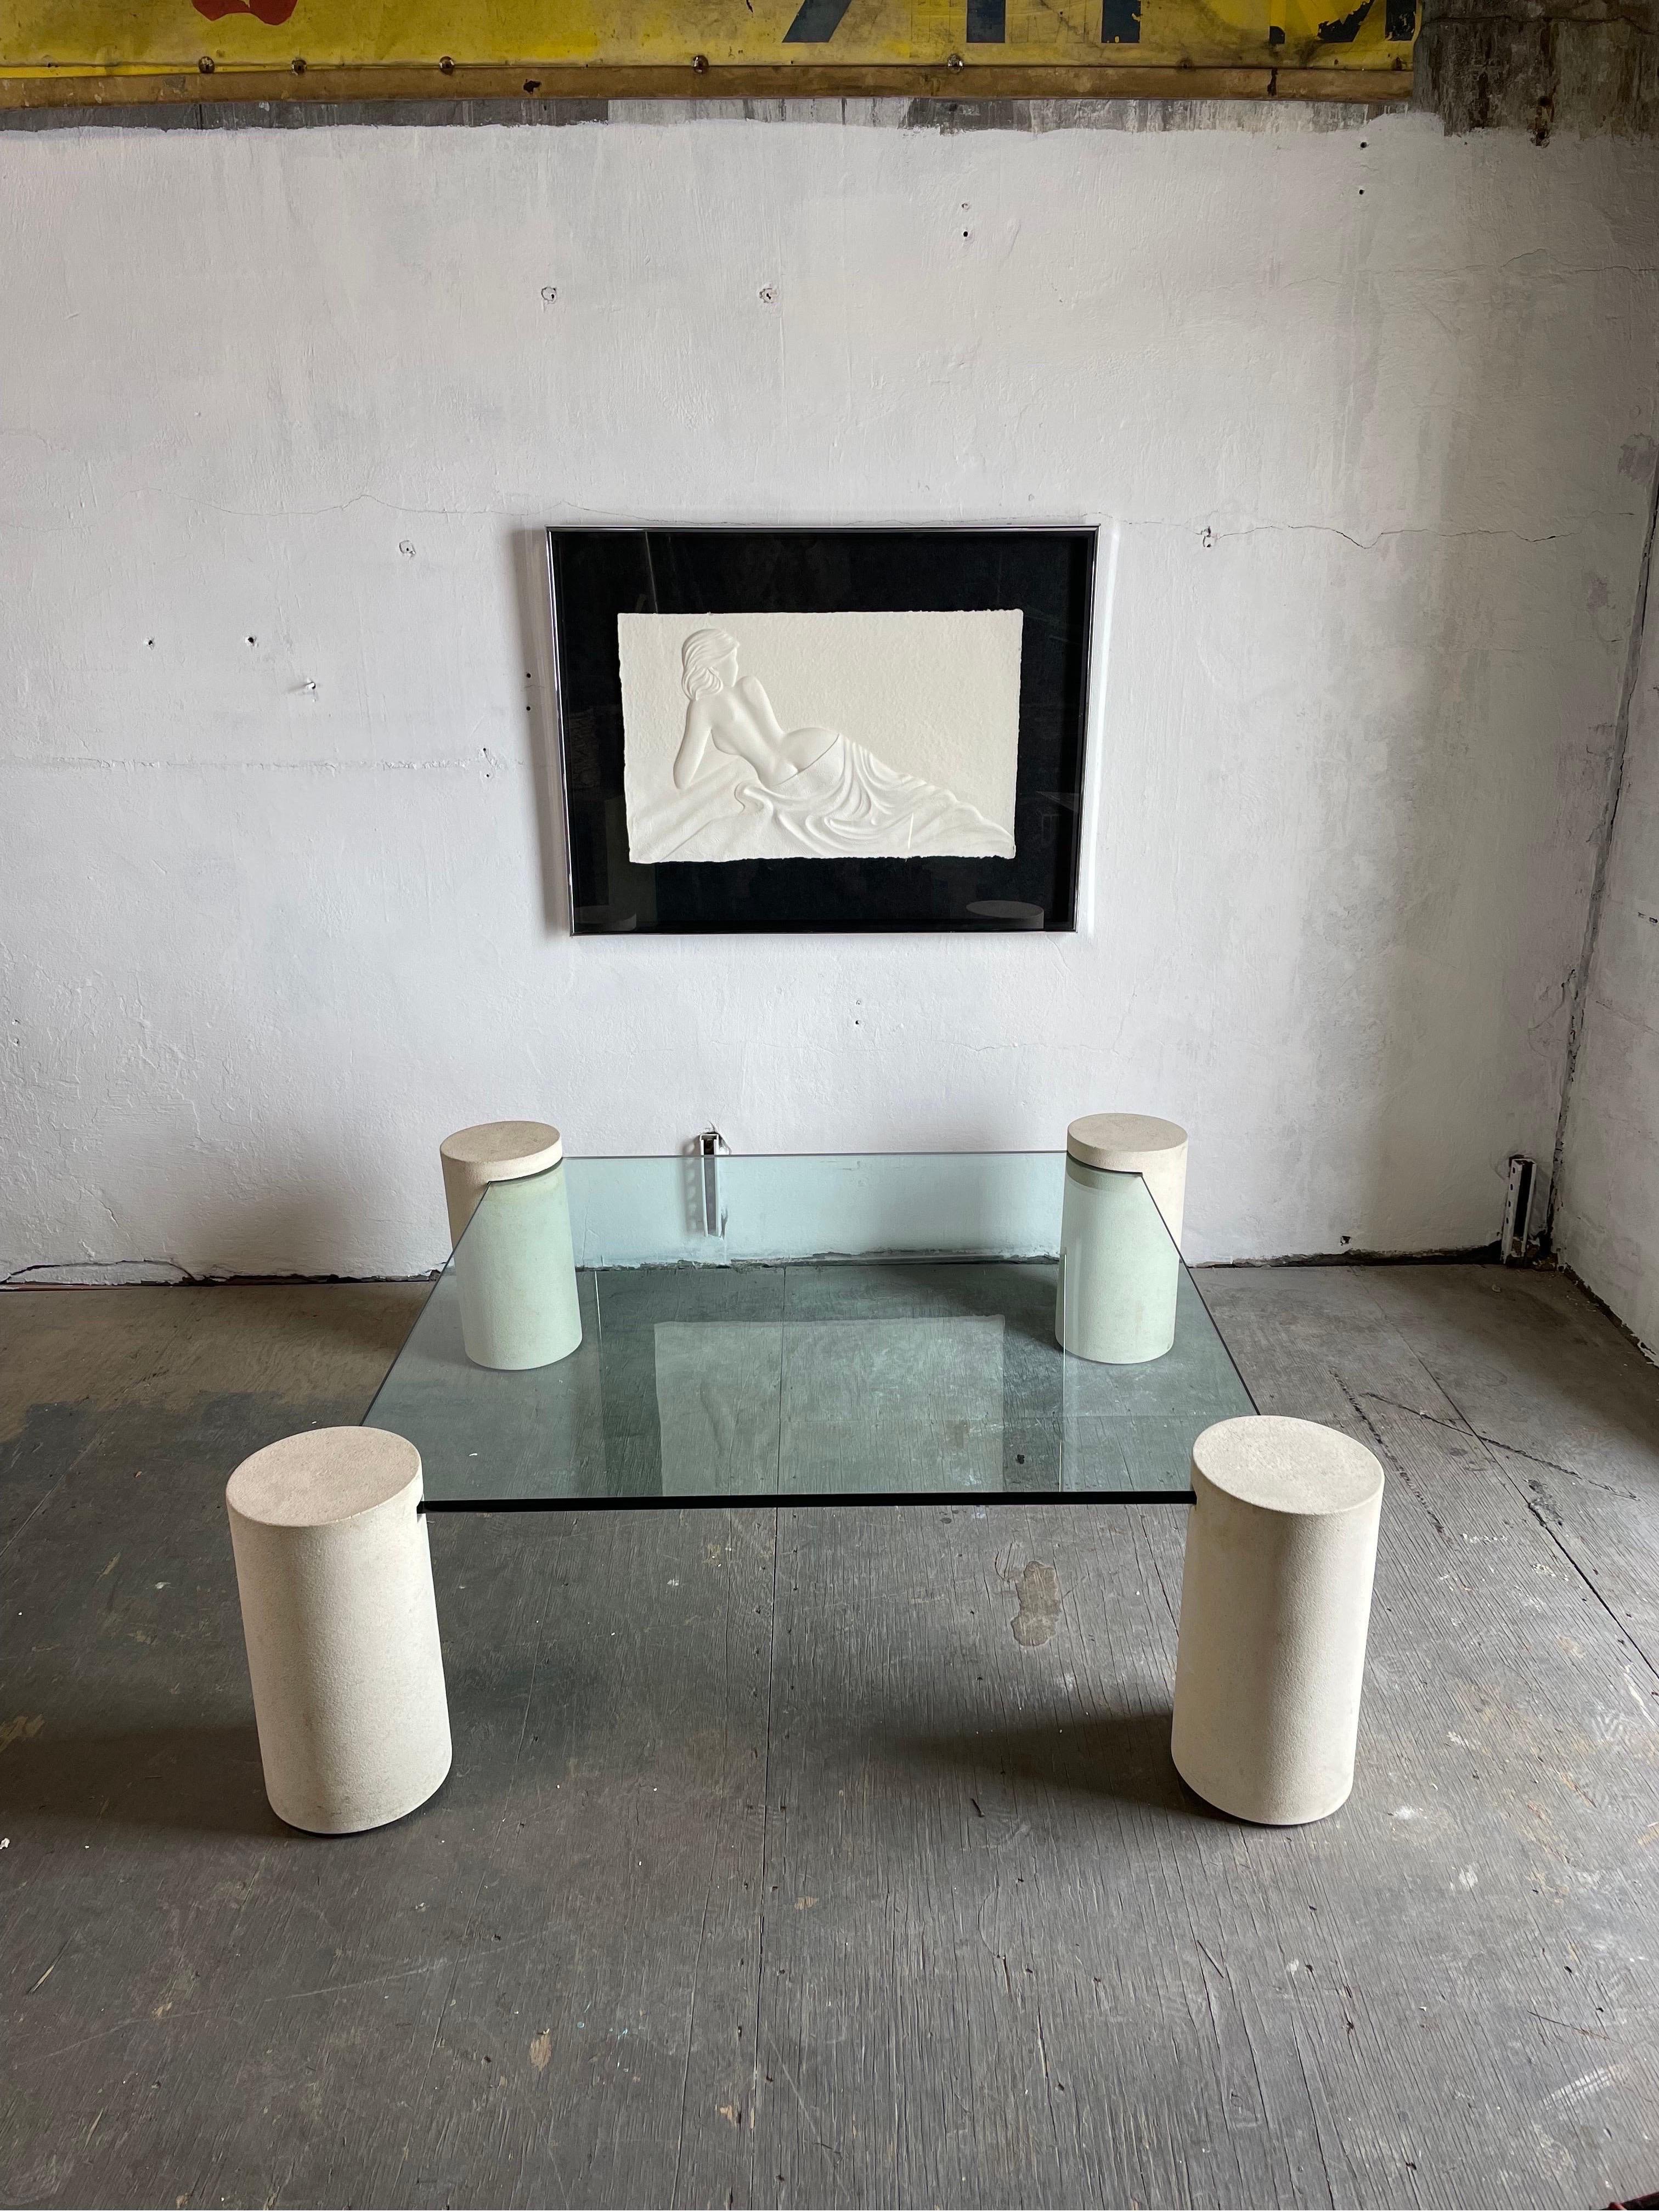 Jaw Dropping circa 1980's modern 4 cylinder columns coffee table made of Plaster, in the style of Massimo Vignelli.